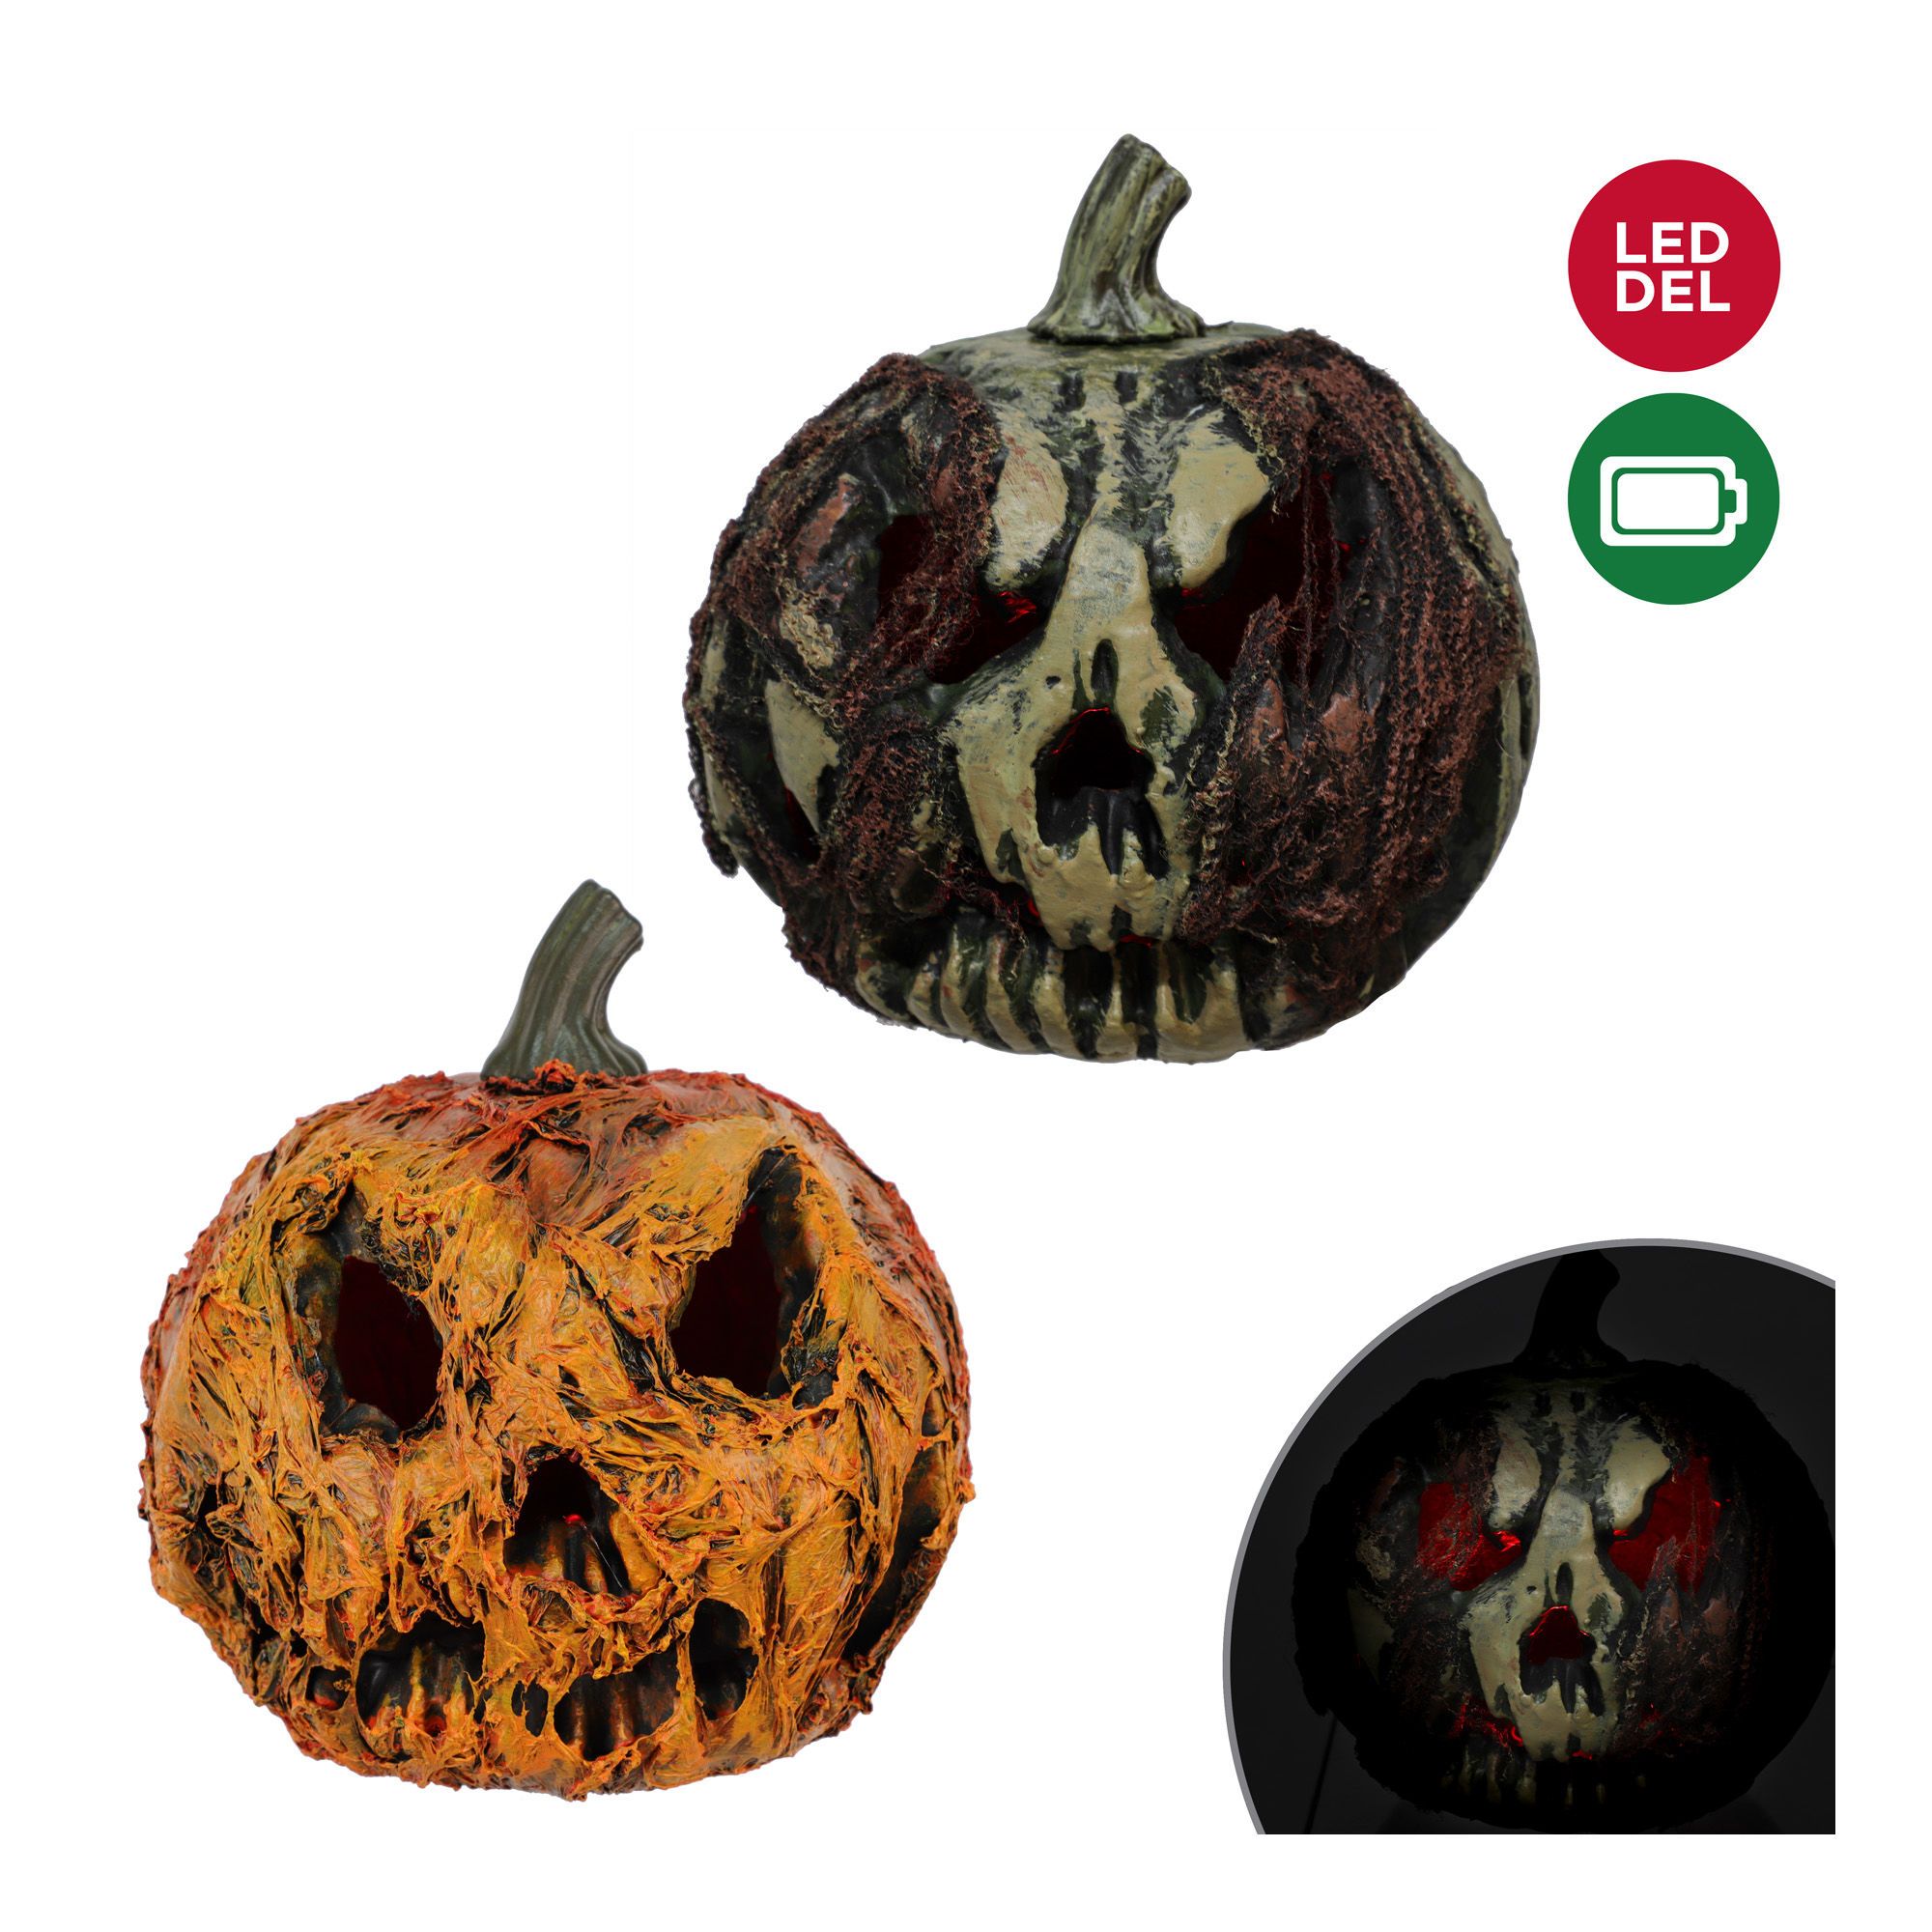 8 Polyfoam and plastic light-up pumpkin (sold individually) from DANSON